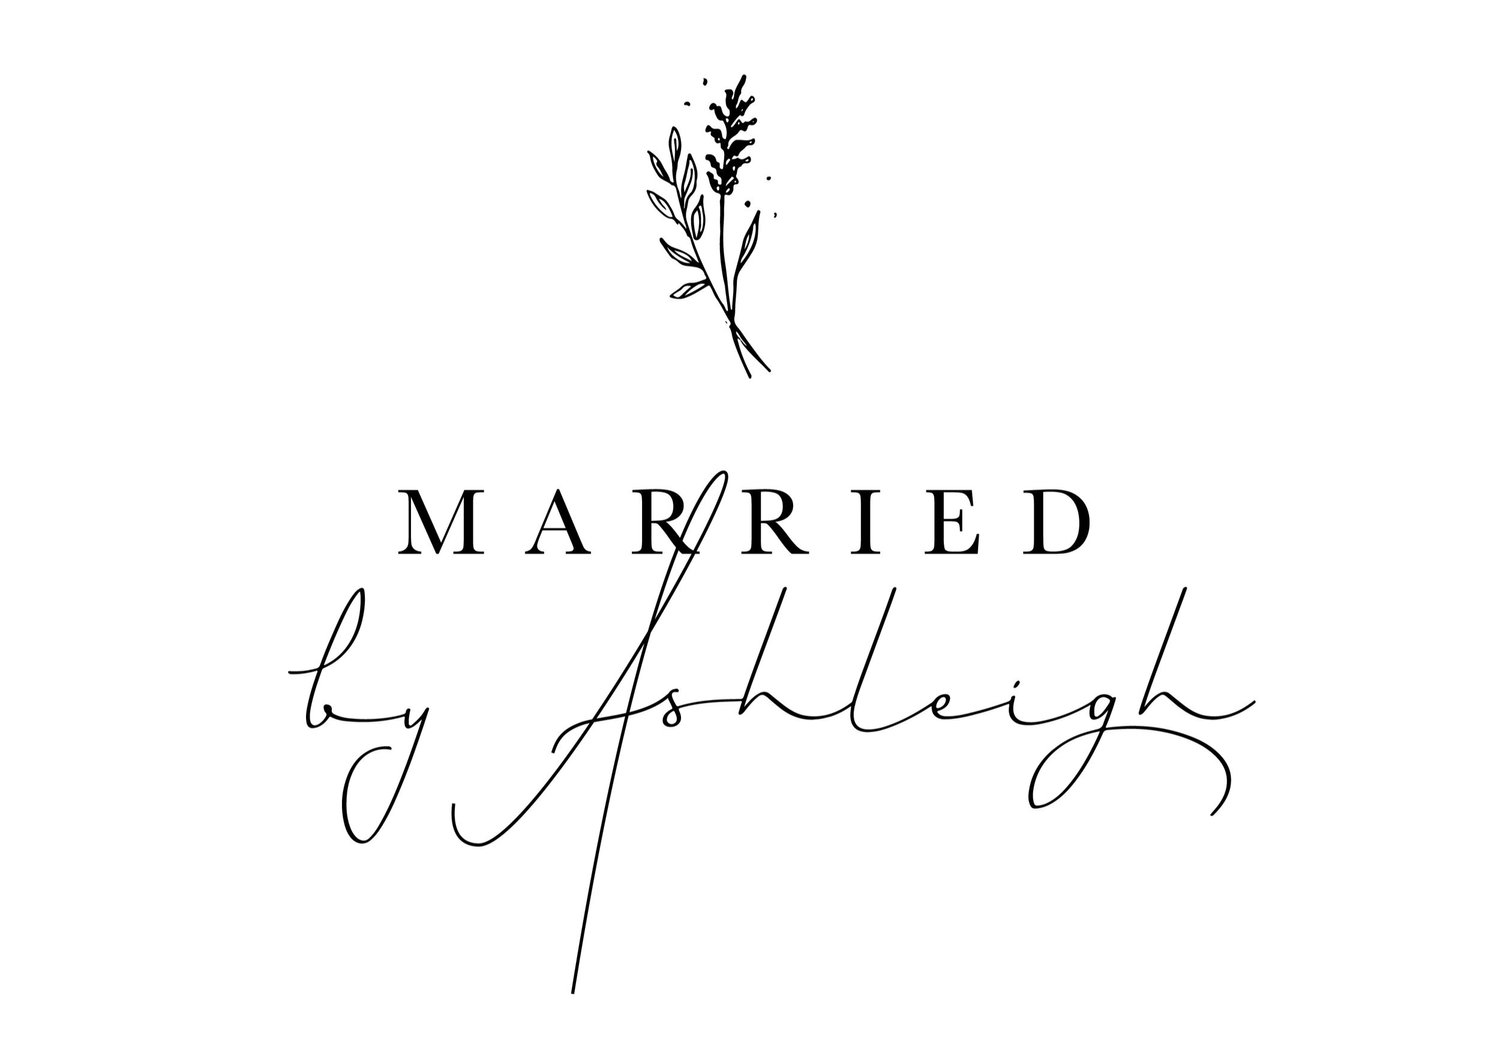 MARRIED BY ASHLEIGH